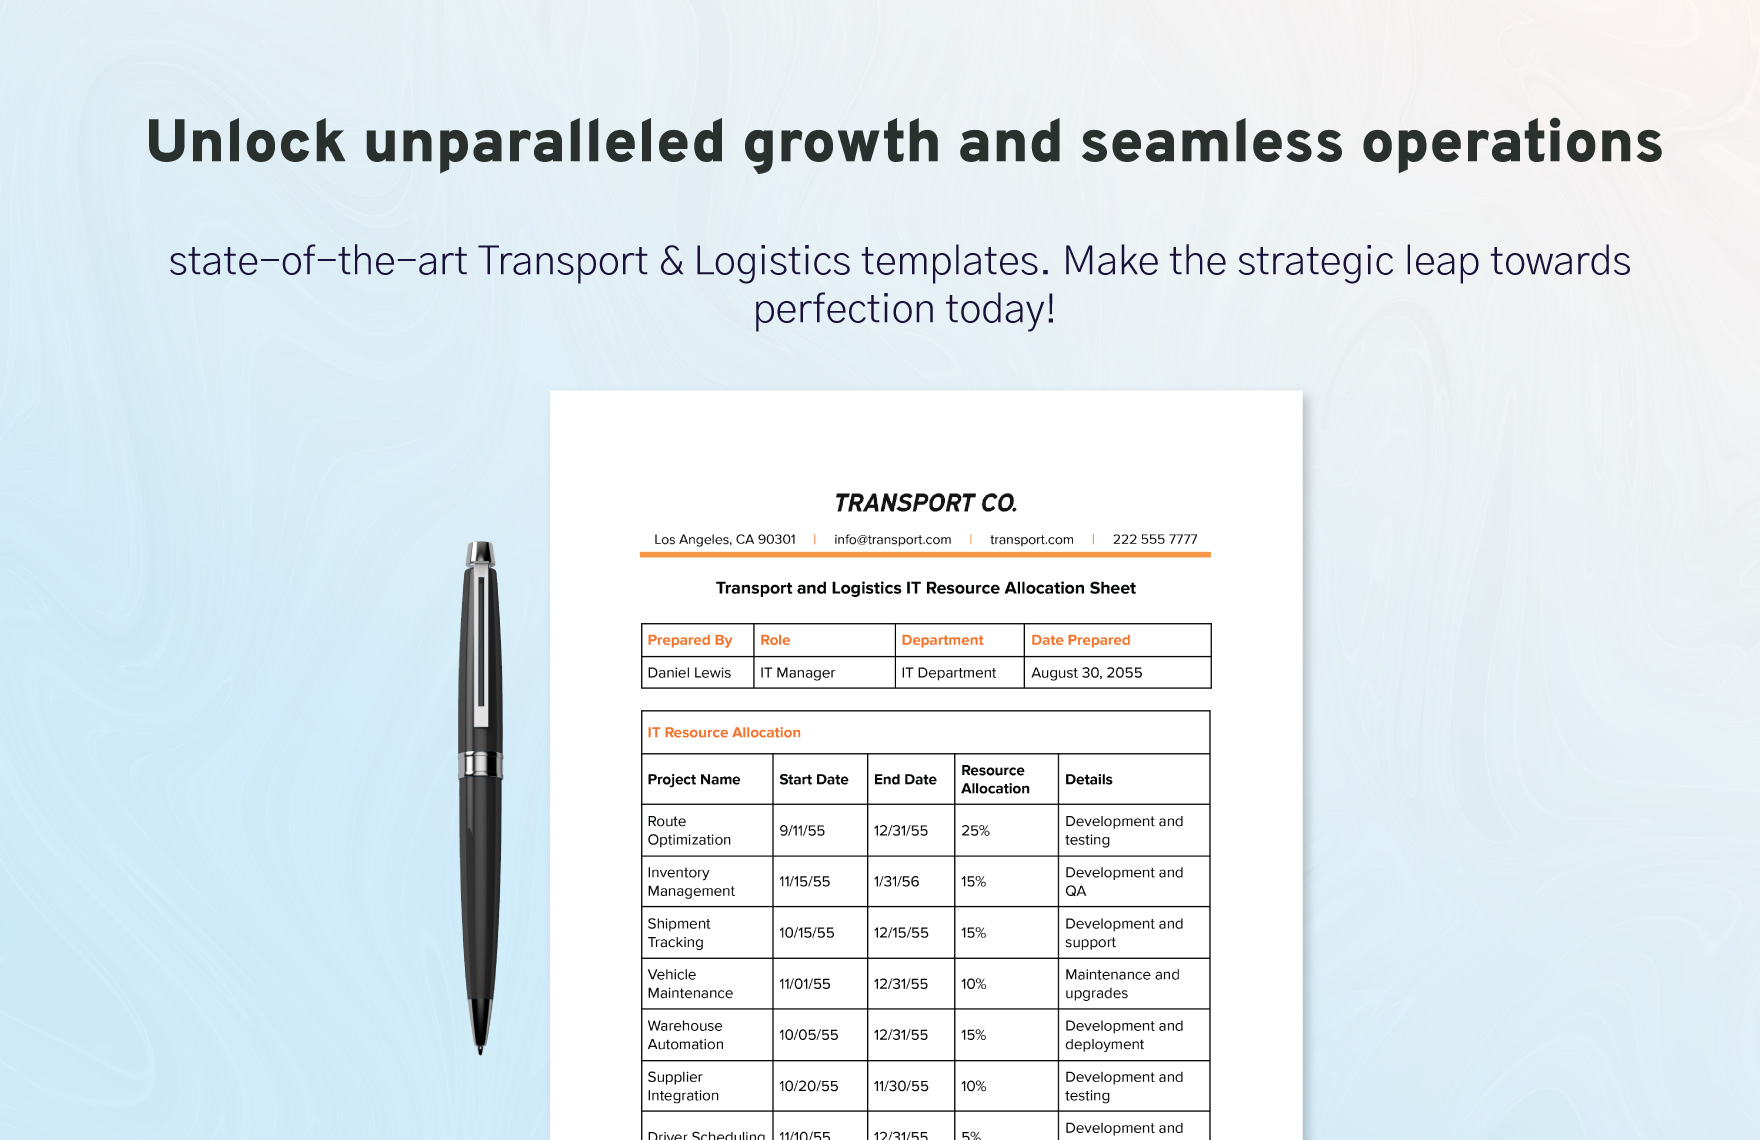 Transport and Logistics IT Resource Allocation Sheet Template